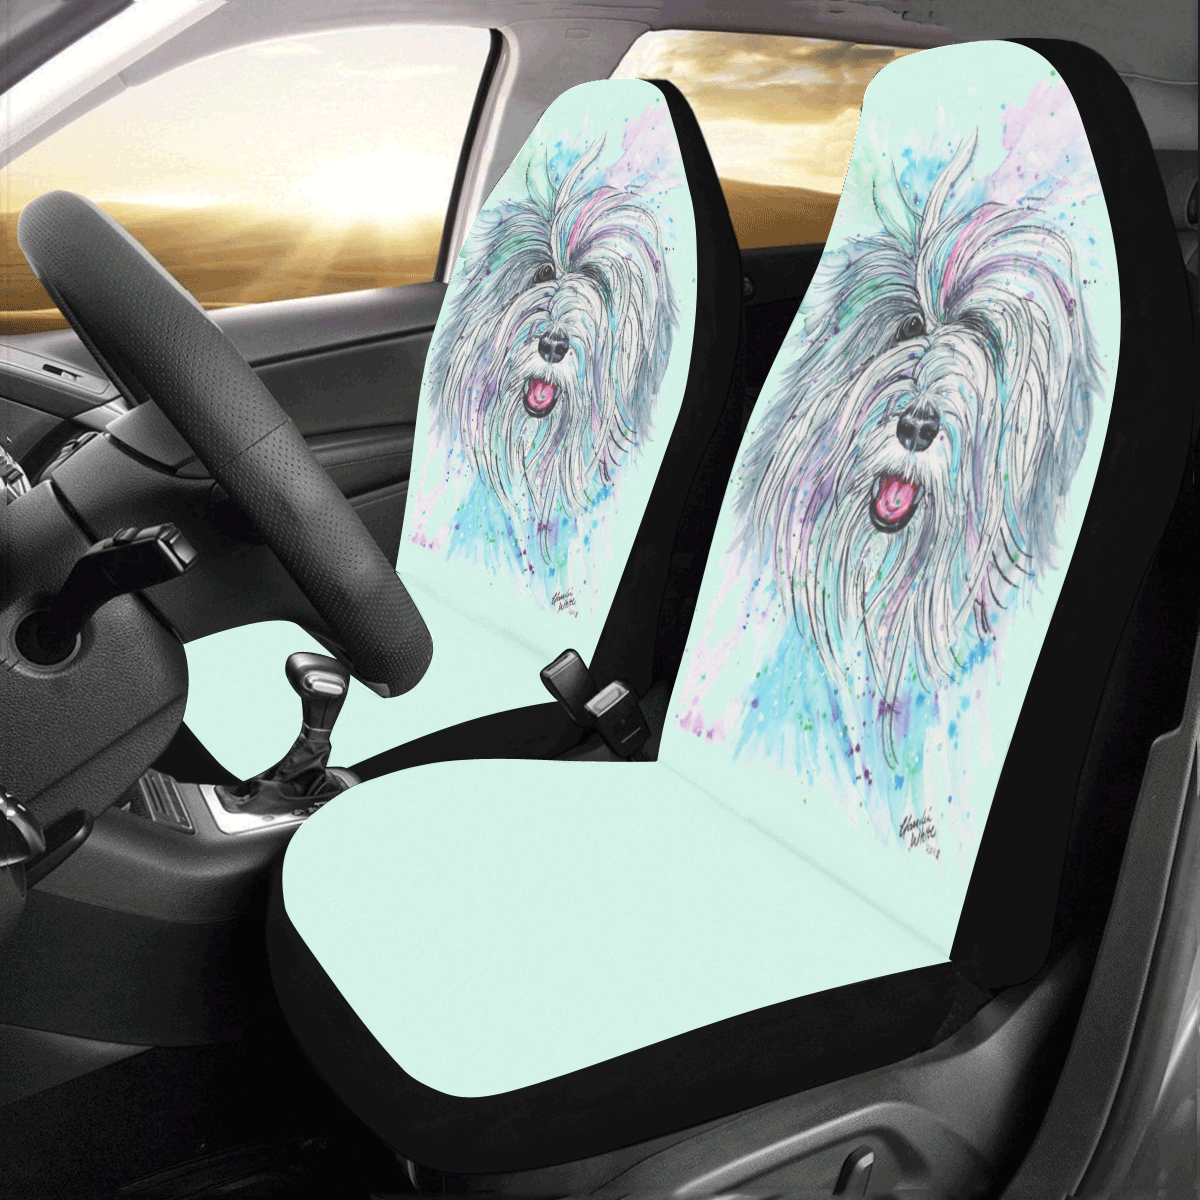 Breezy Car Seat Covers (Set of 2)